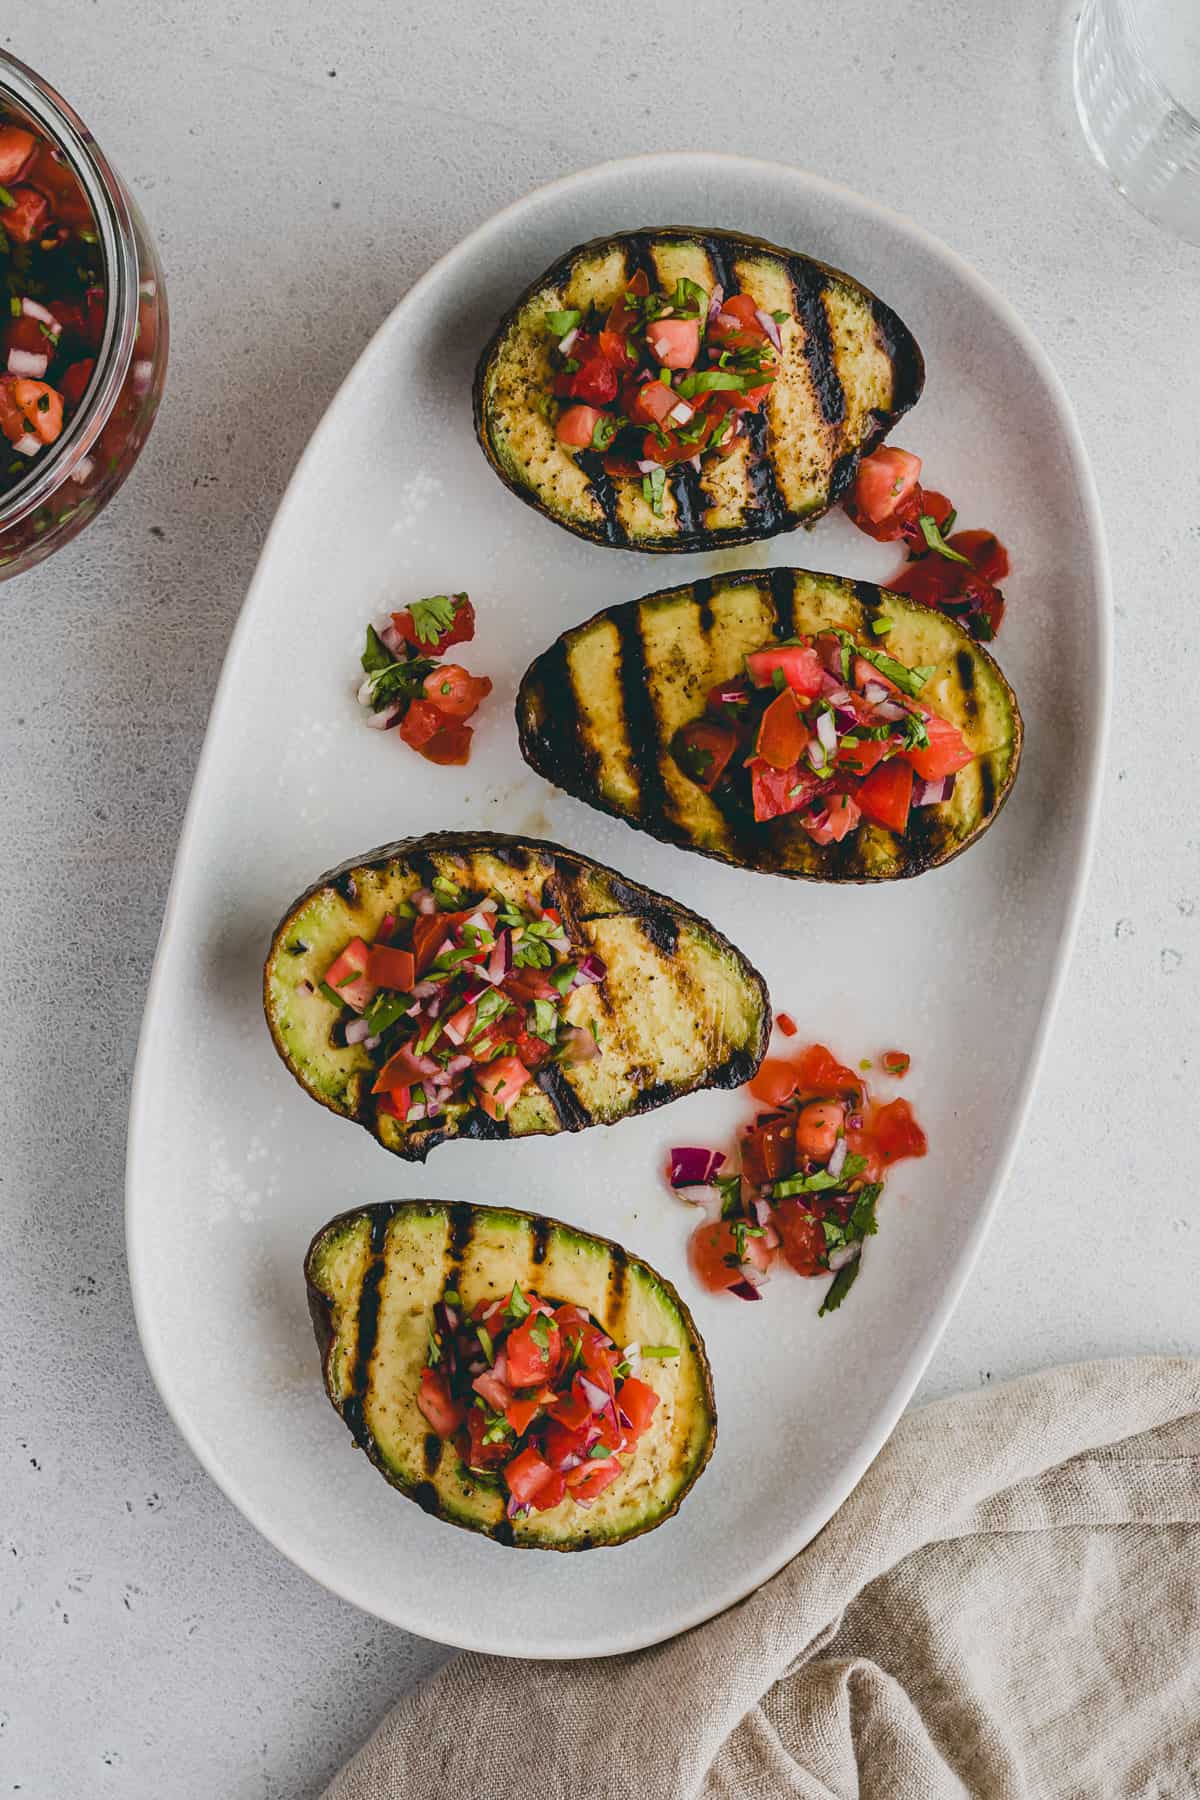 grilled avocado served on a white plate